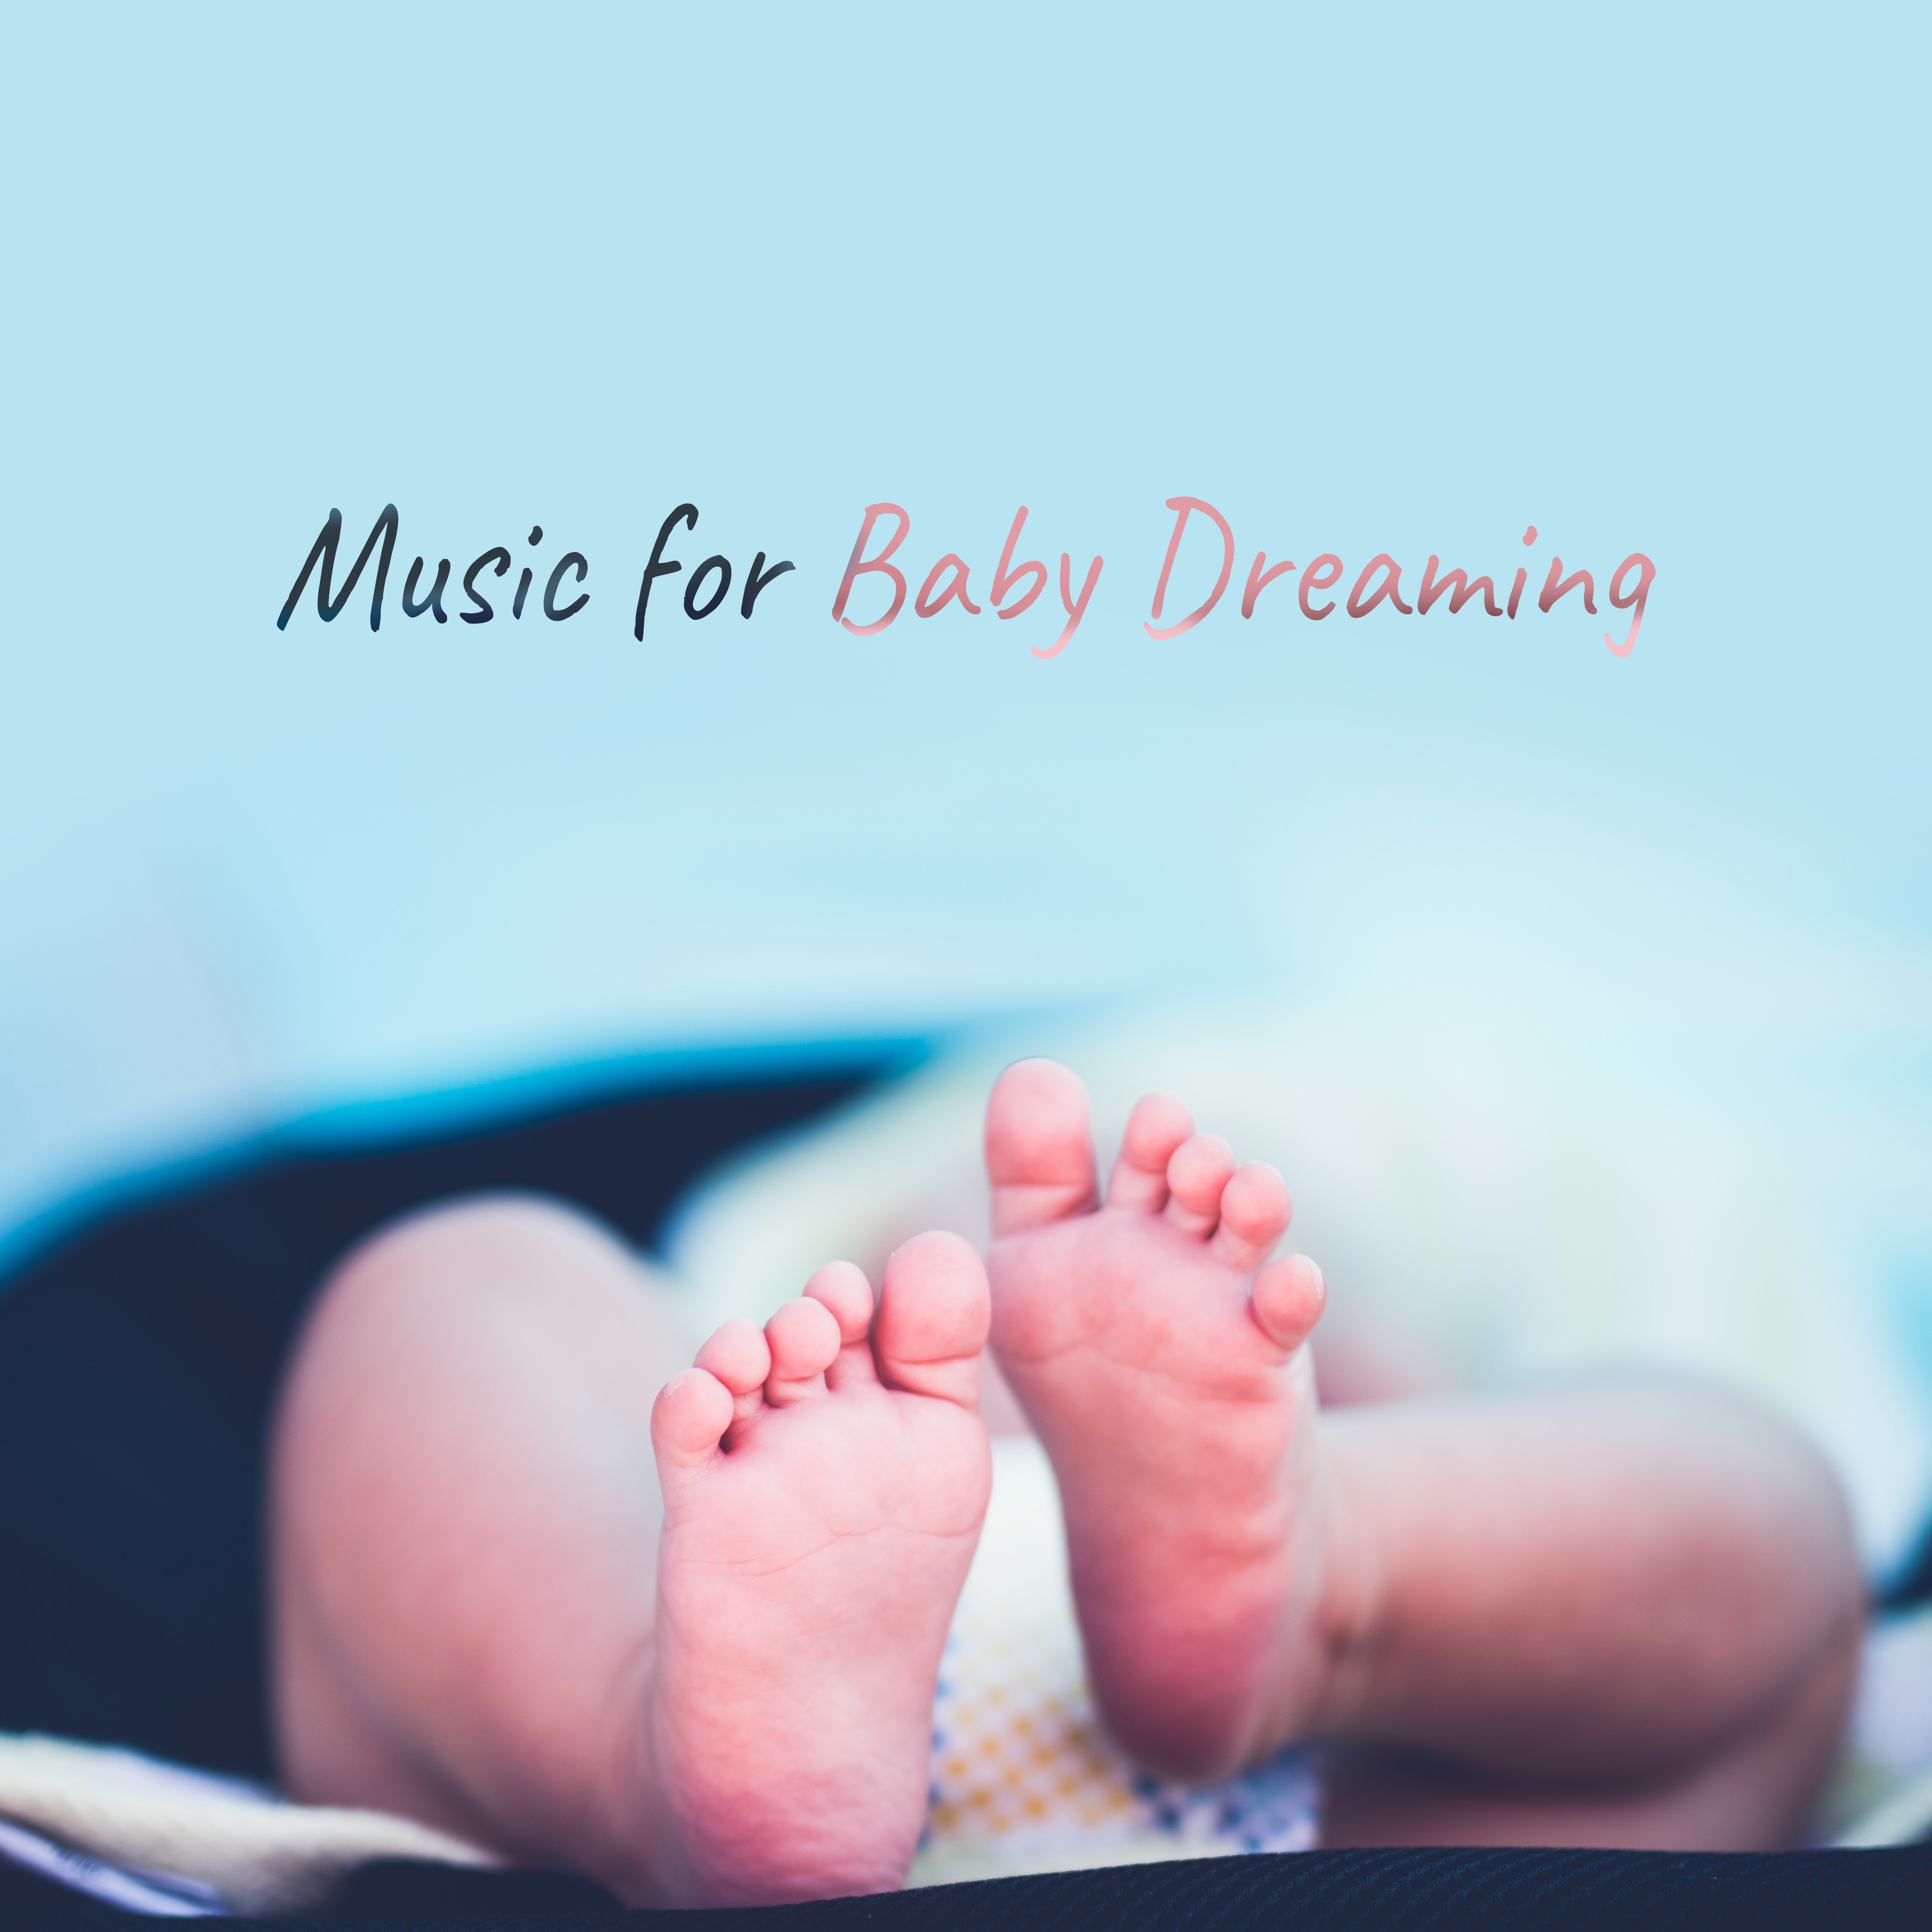 Music for Baby Dreaming  Calm Sounds to Relax Baby, Soothing Melodies, All Night Dreaming